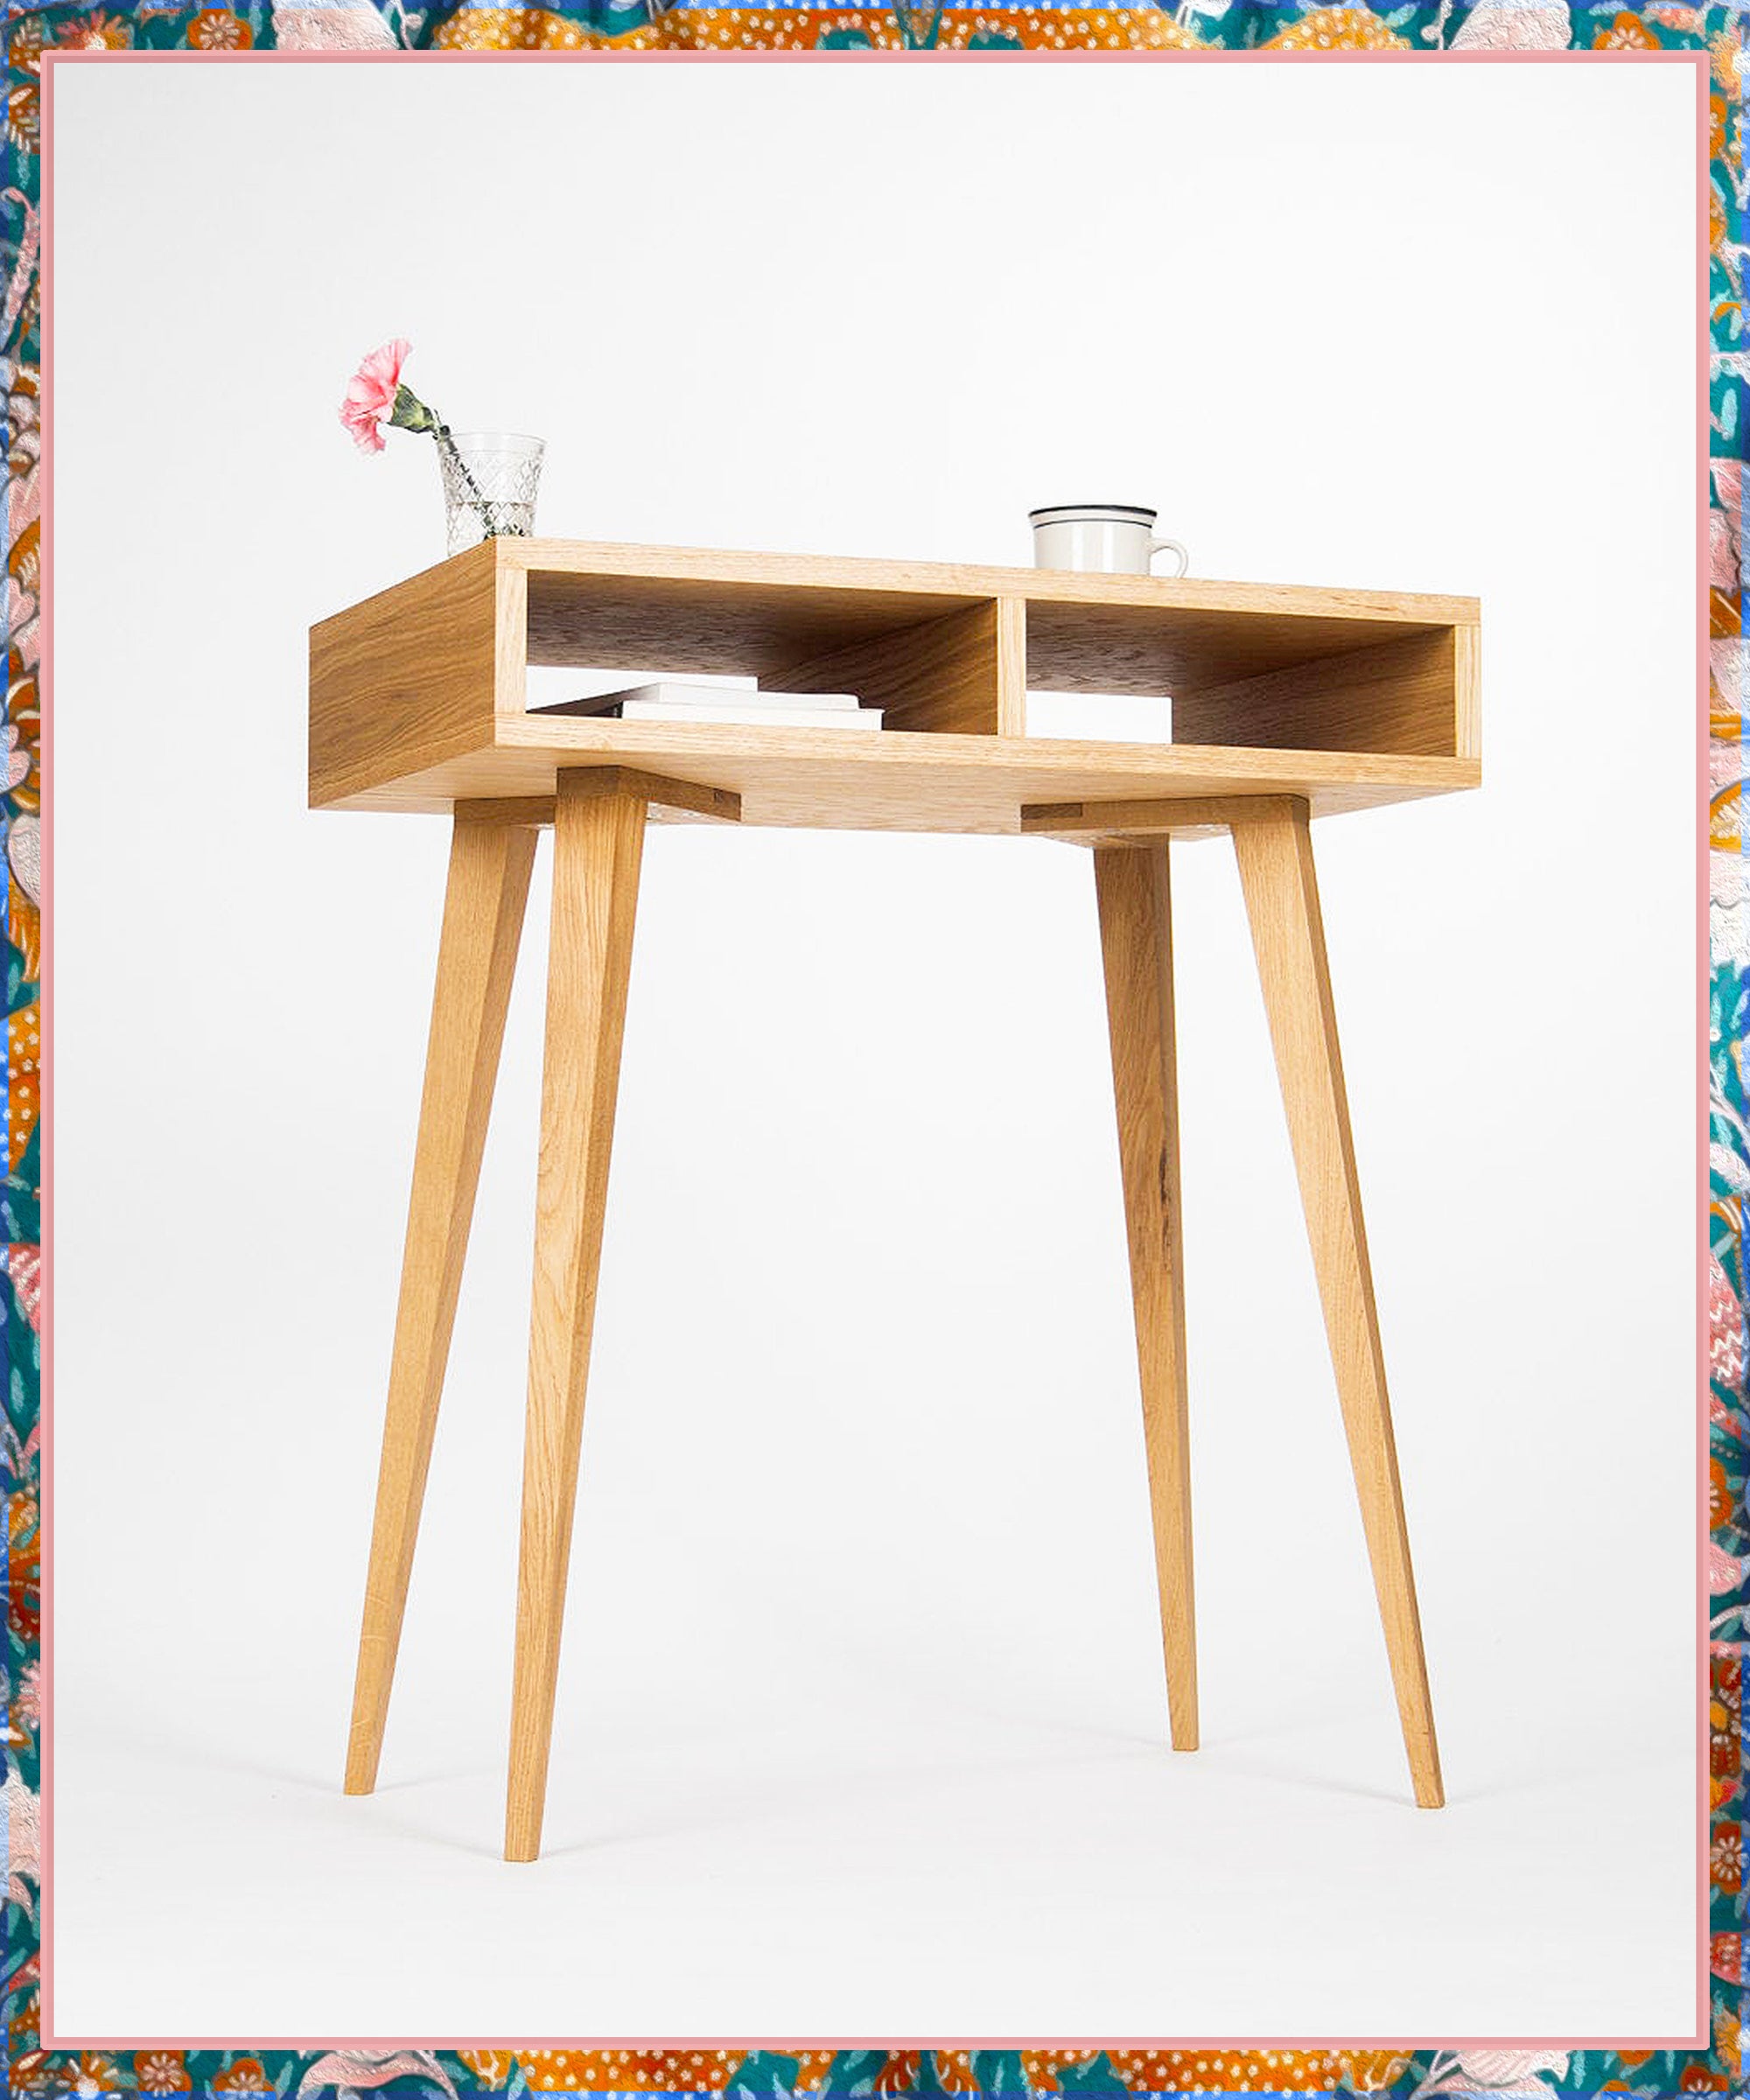 Best Desks For Small Living Spaces Homes 2020